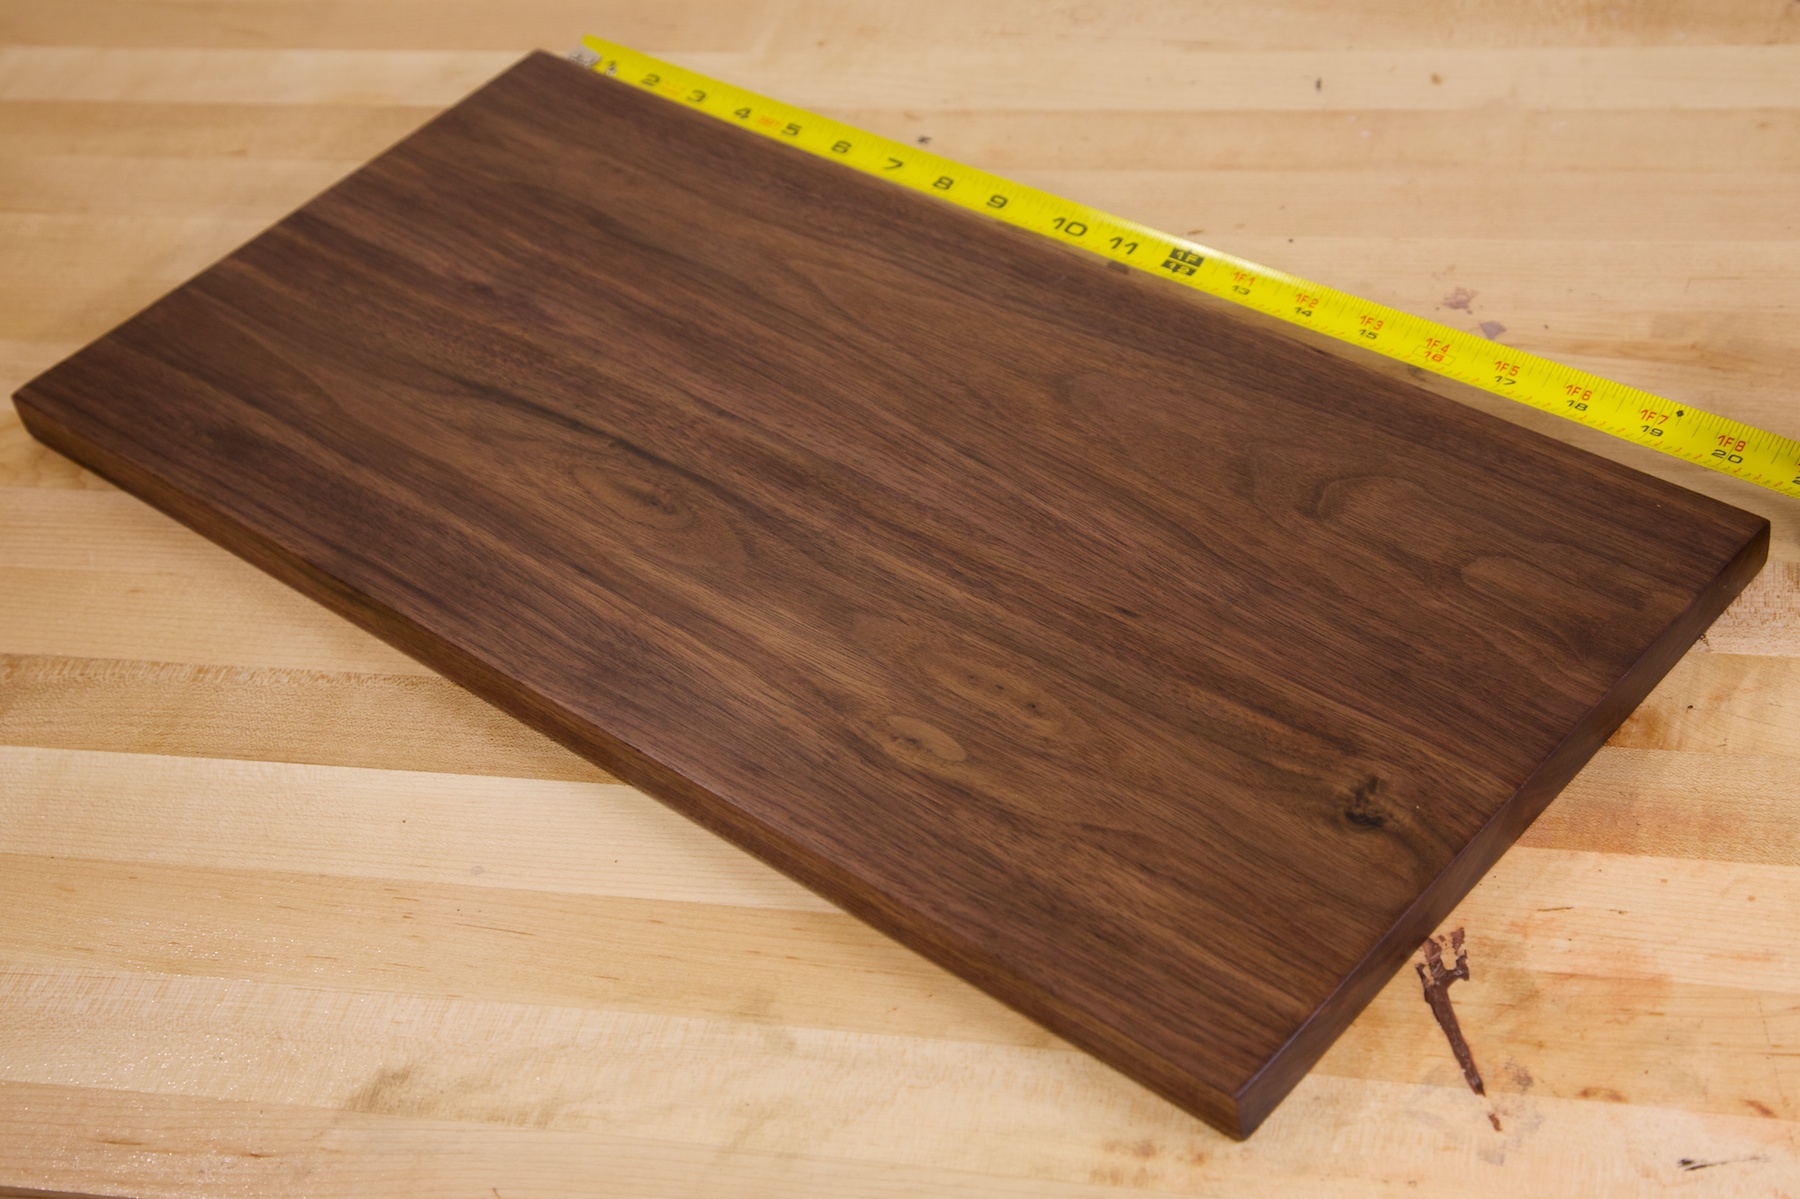 Applying Oil Finishes and Varnishes on Wood - Woodworking